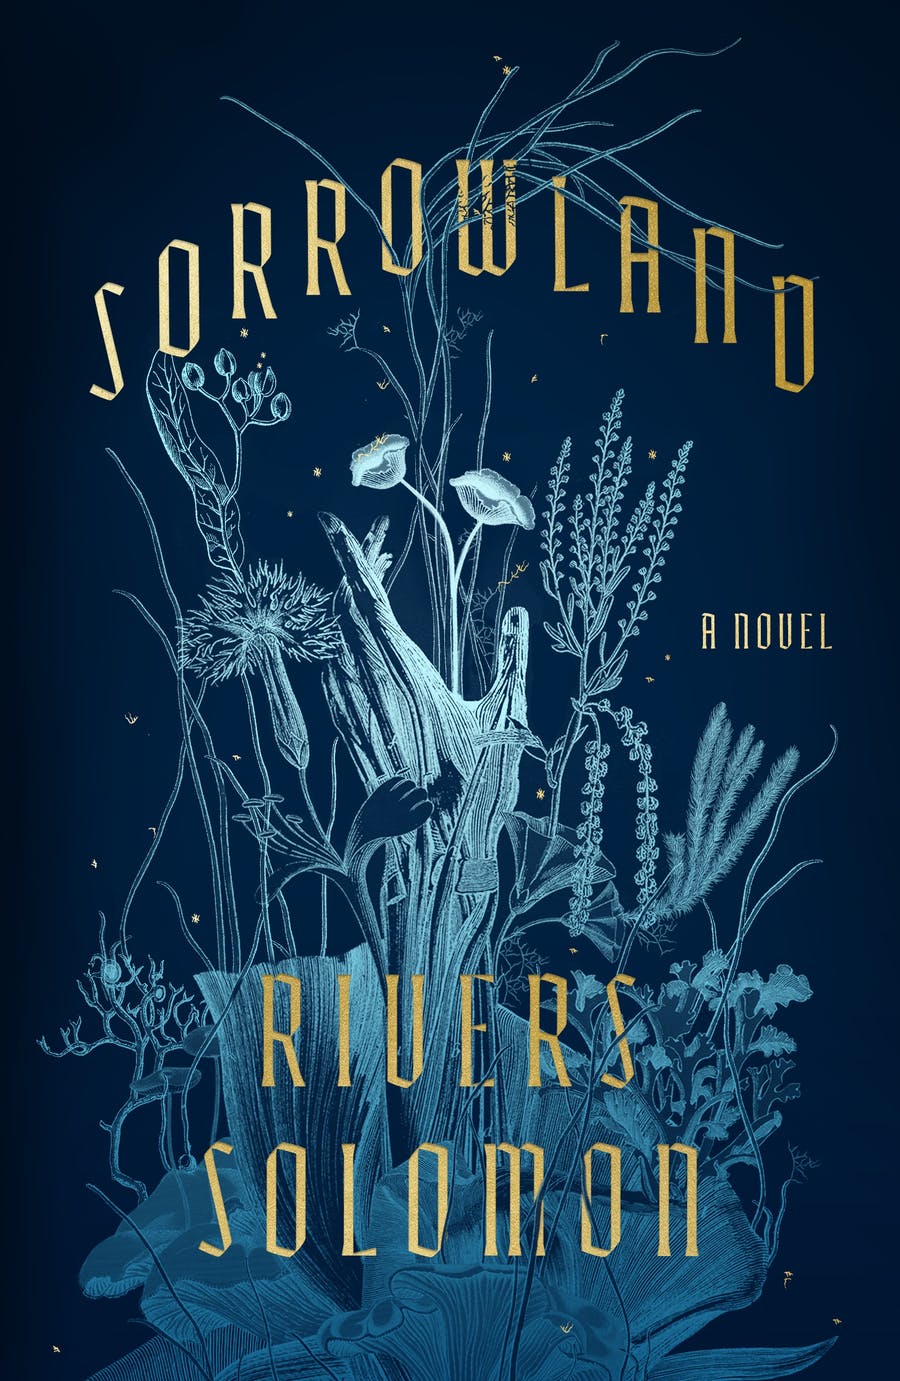 The cover photo for the novel SORROWLAND, by Rivers Solomon